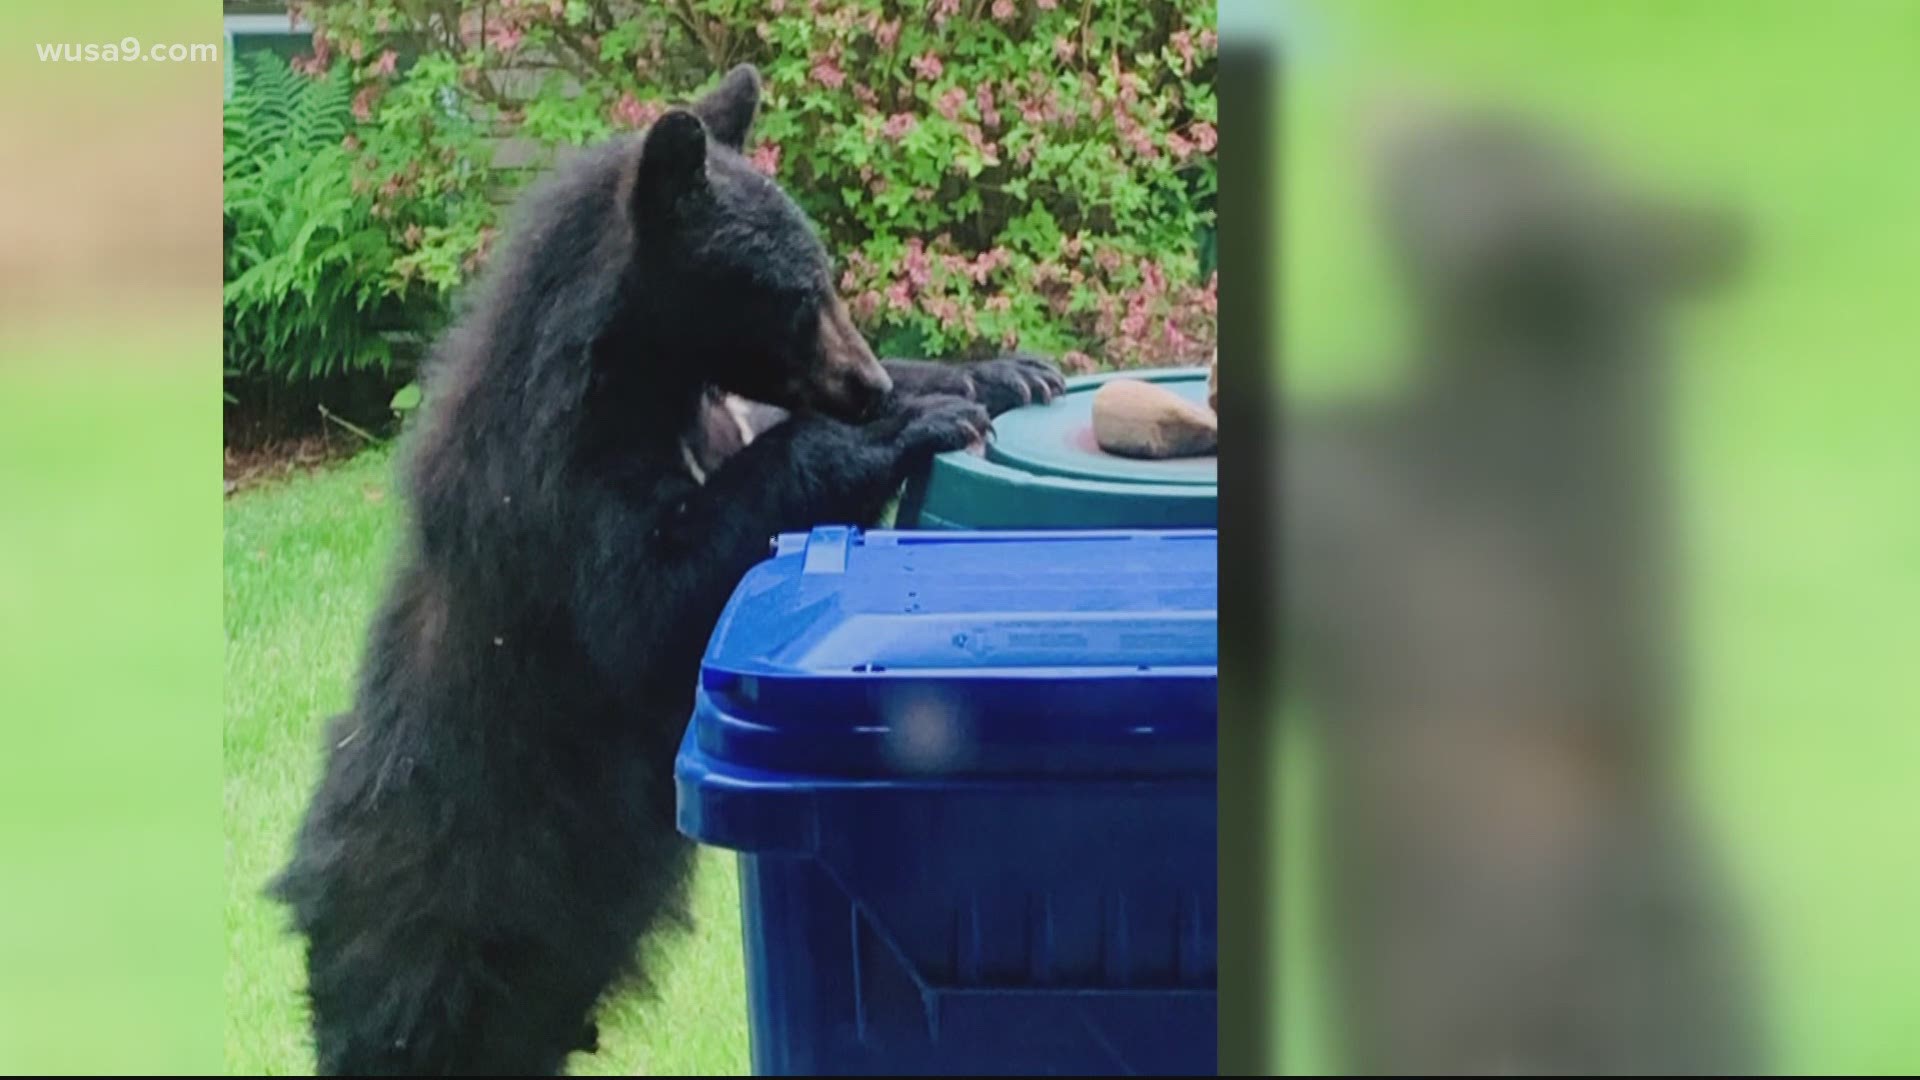 Residents are advised to bring in bird feeders, secure trash, and store grills after use as juvenile bears make annual inroads to suburbia